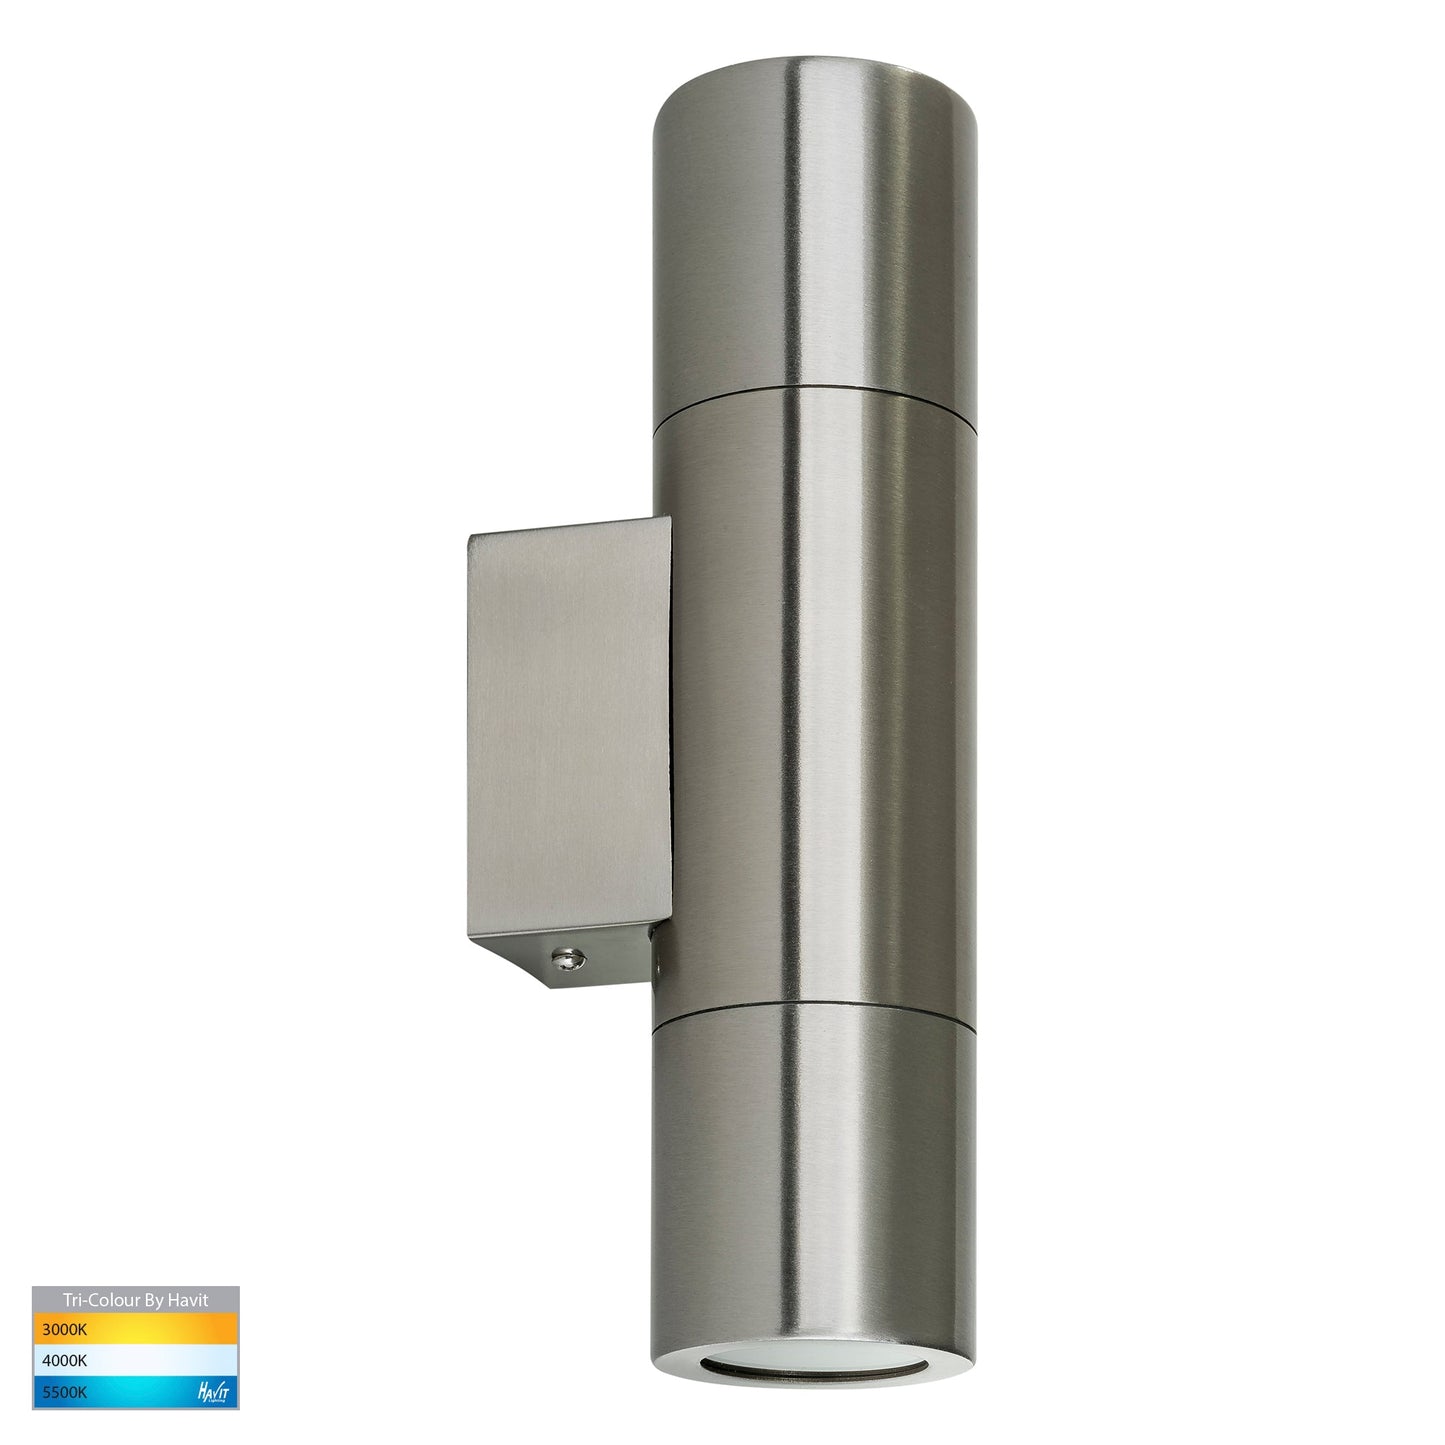 Hv1071t - Piaz Stainless Steel Tri Colour Up & Down Wall Pillar Lights